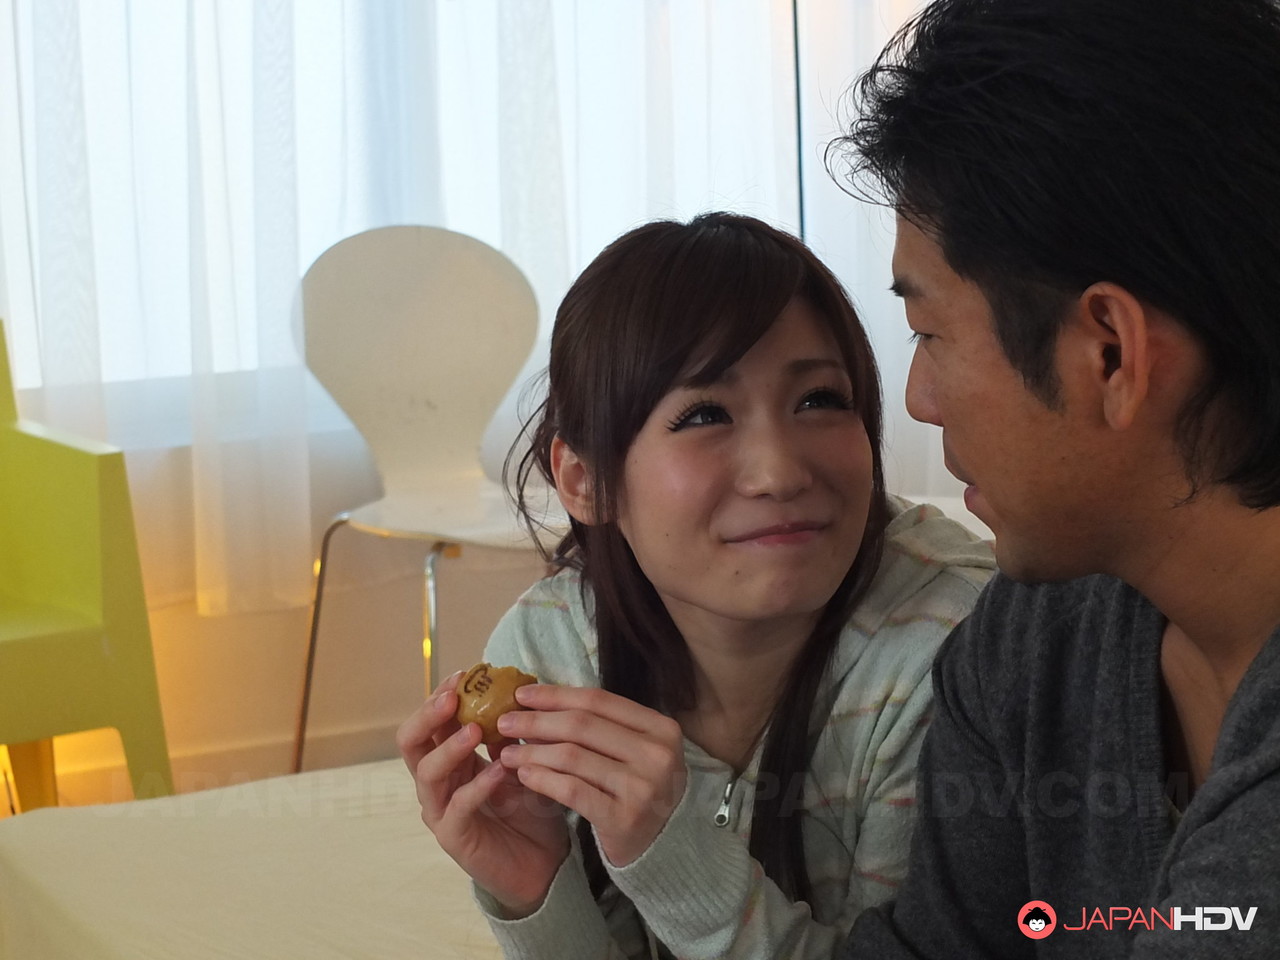 Asian nymphos with hot bodies Koi Miyamura and Tsukushi toy each other's clam foto porno #427162243 | Japan HDV Pics, Koi Miyamura, Tsukushi, Japanese, porno ponsel